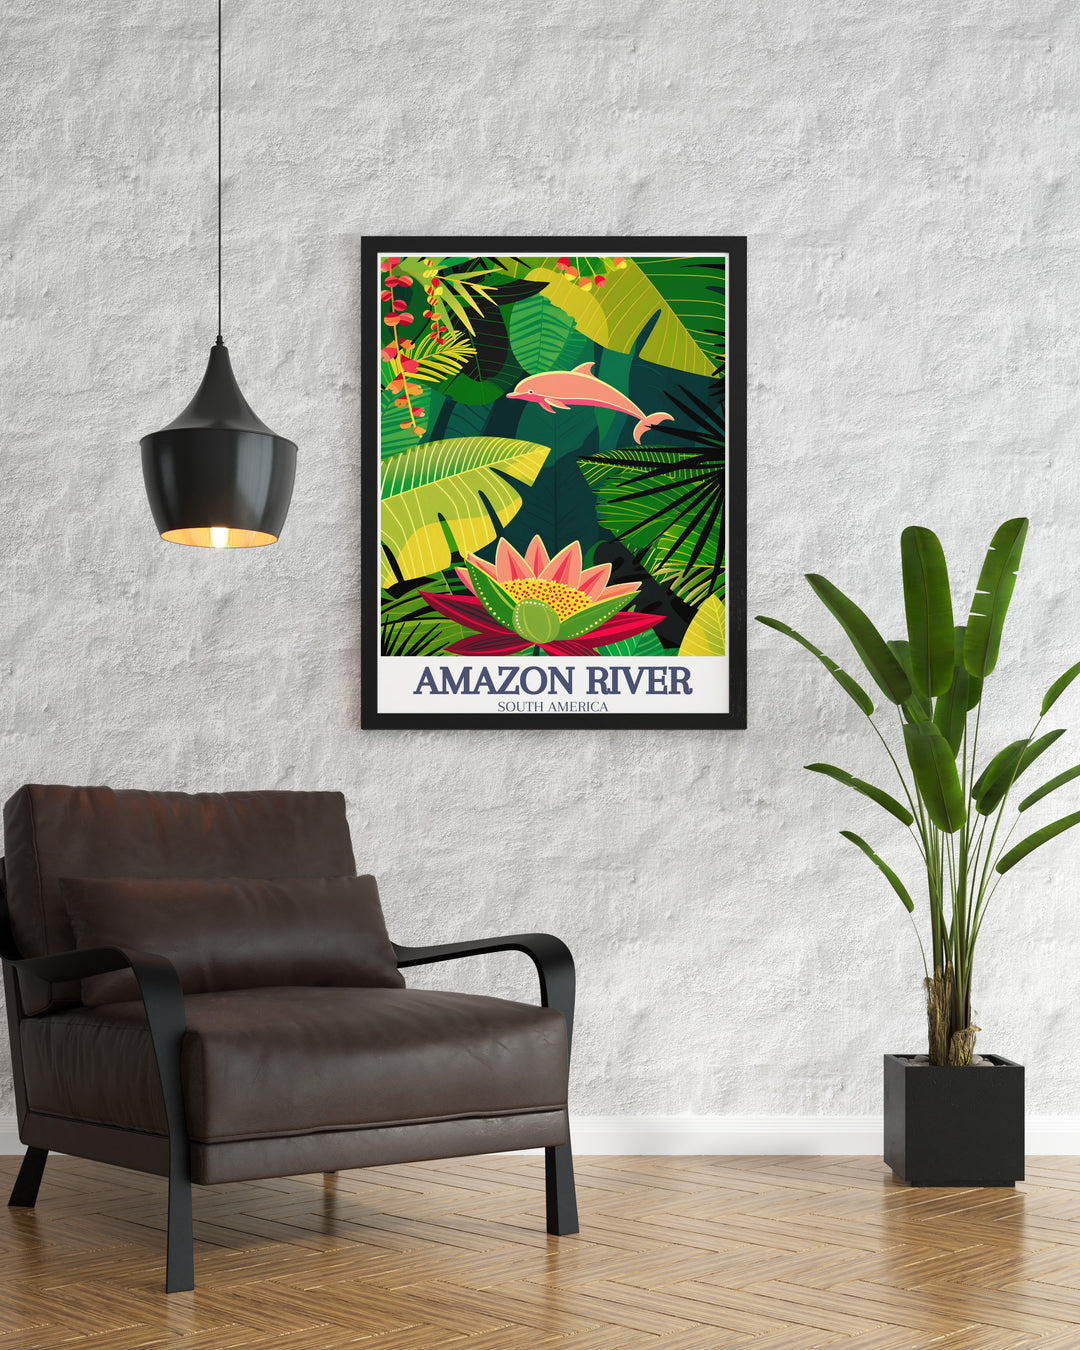 Victoria Regia water lily, Amazon river dolphin poster offering a glimpse into the beauty of the Amazon rainforest. This vintage style print is perfect for collectors and makes a great gift for birthdays, anniversaries, or Christmas.